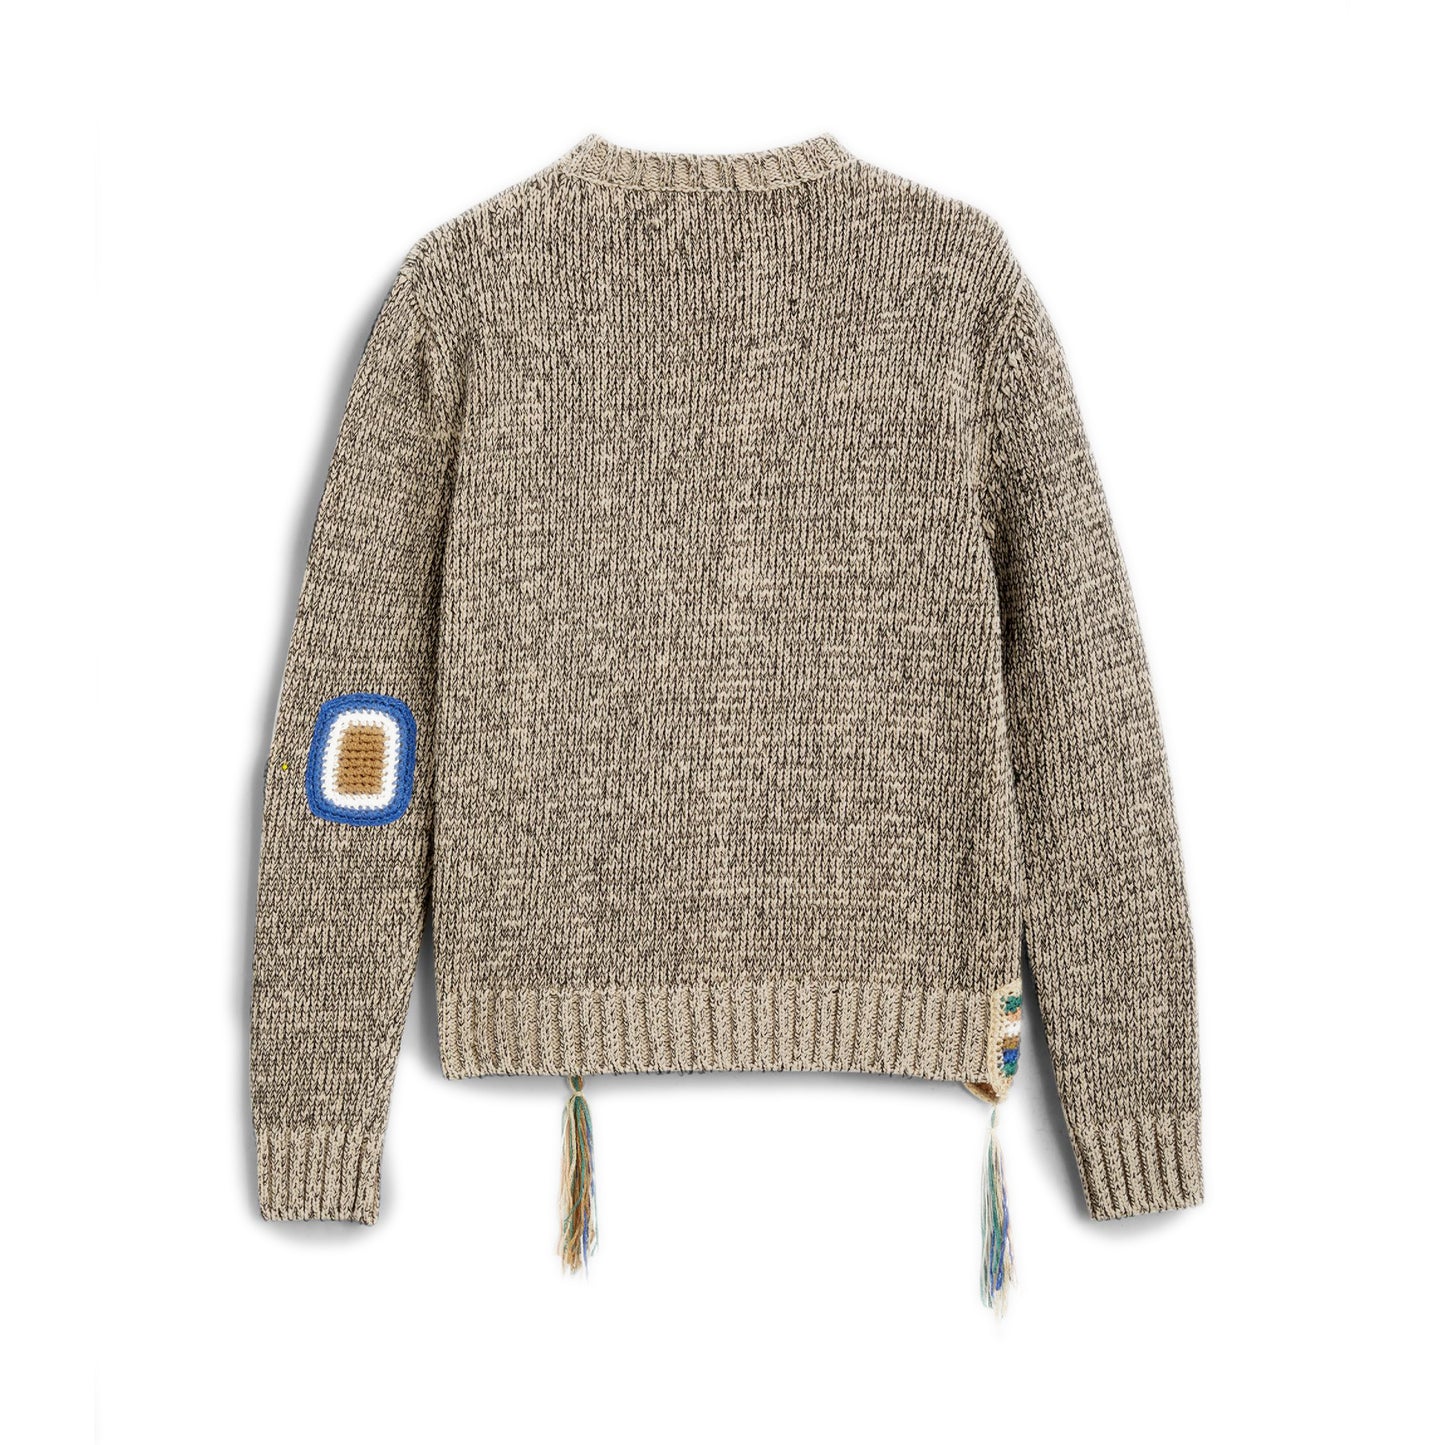 Light Beige Crewneck Sweater Cotton Jersey at Heavy Gauge  NF multicolor Crochet Details in 3 GG Composition: 100% cotton Dry Clean Made in Italy